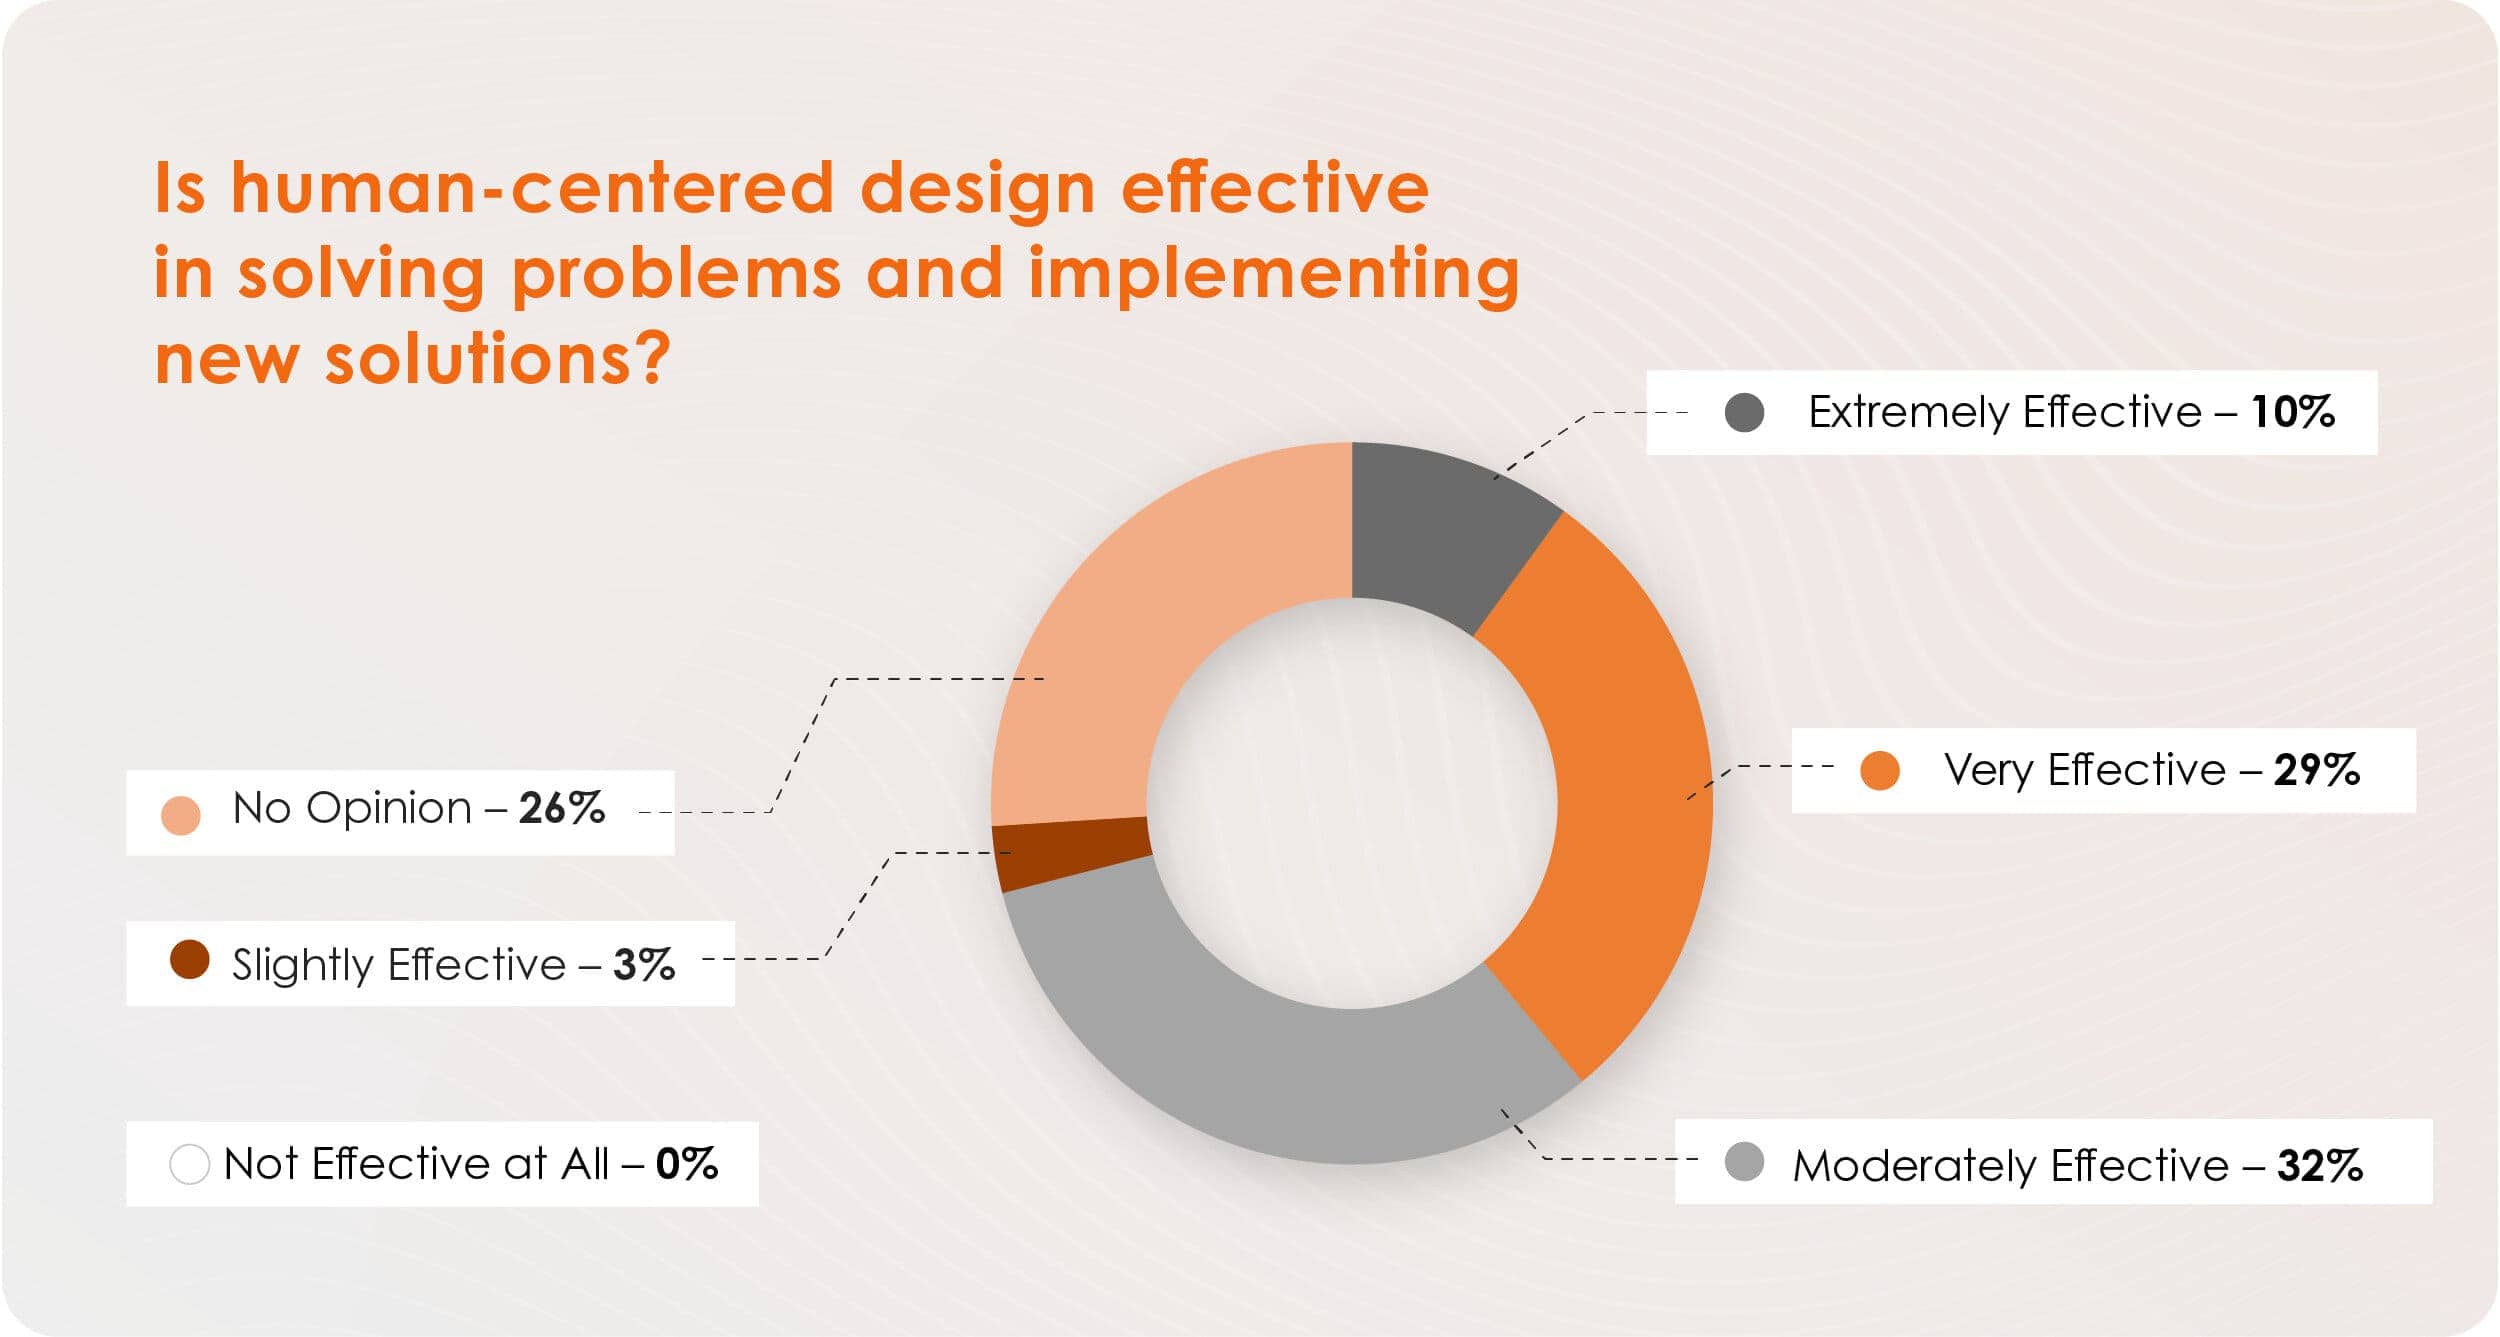 Donut chart on human-centered design effectiveness: 29% very, 32% moderate, 10% extremely effective, 3% slight, 26% no opinion.